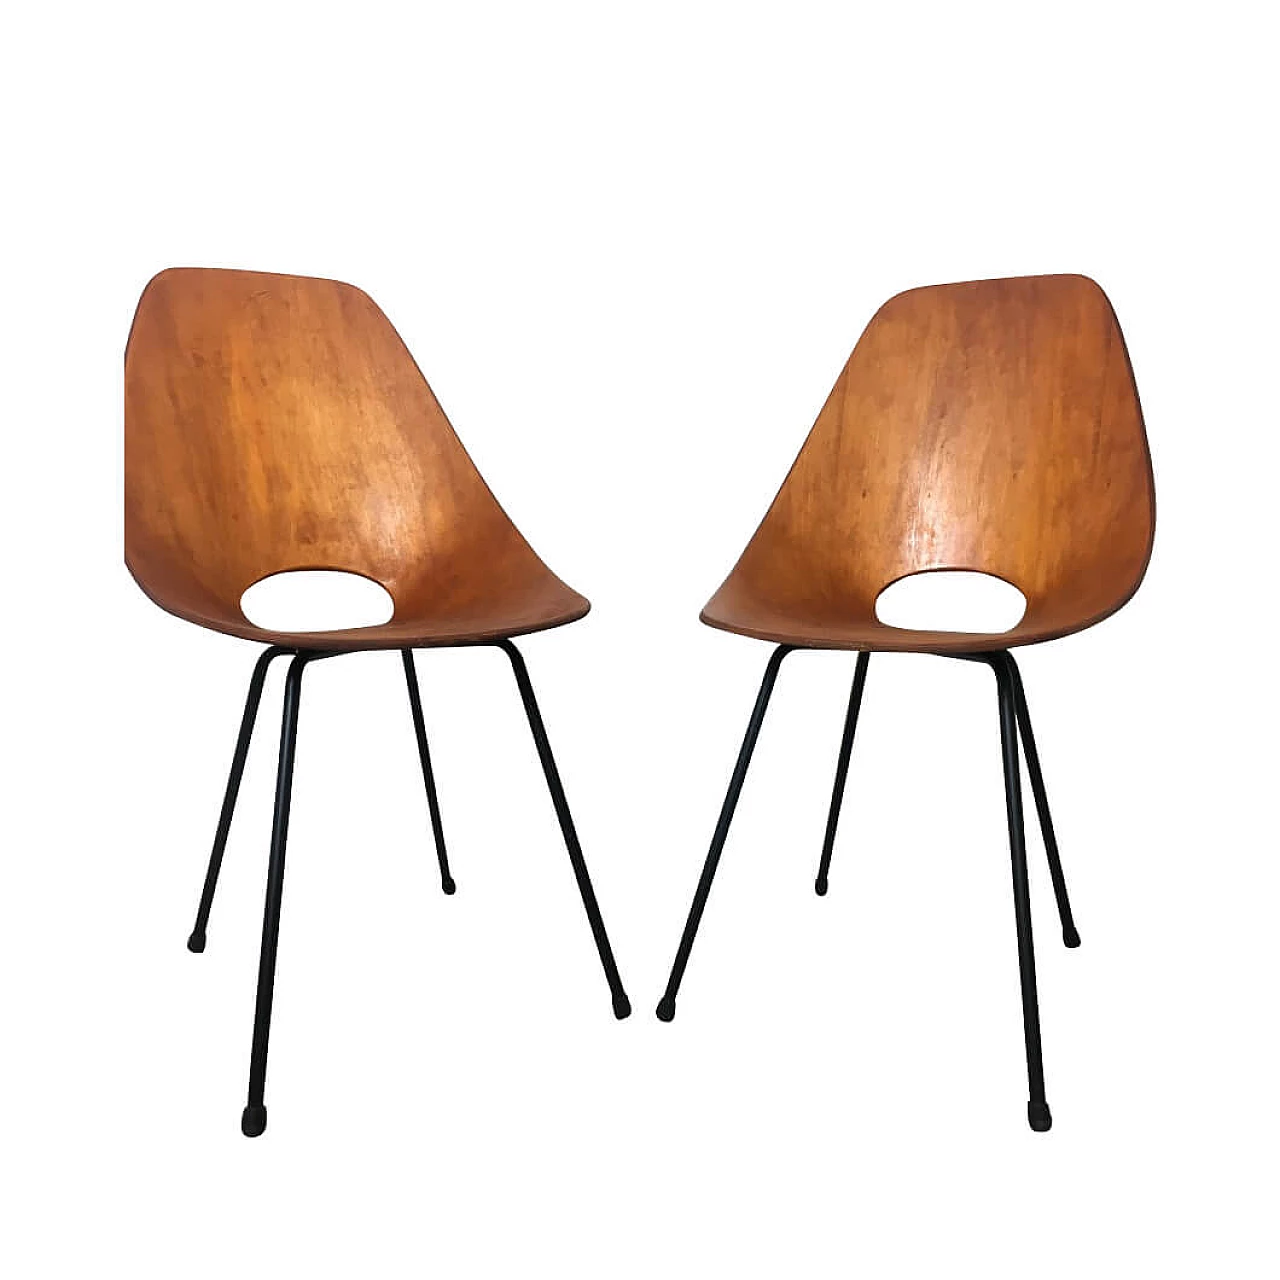 Pair of chairs in curved plywood by Vittorio Nobili, 1950s 1183896